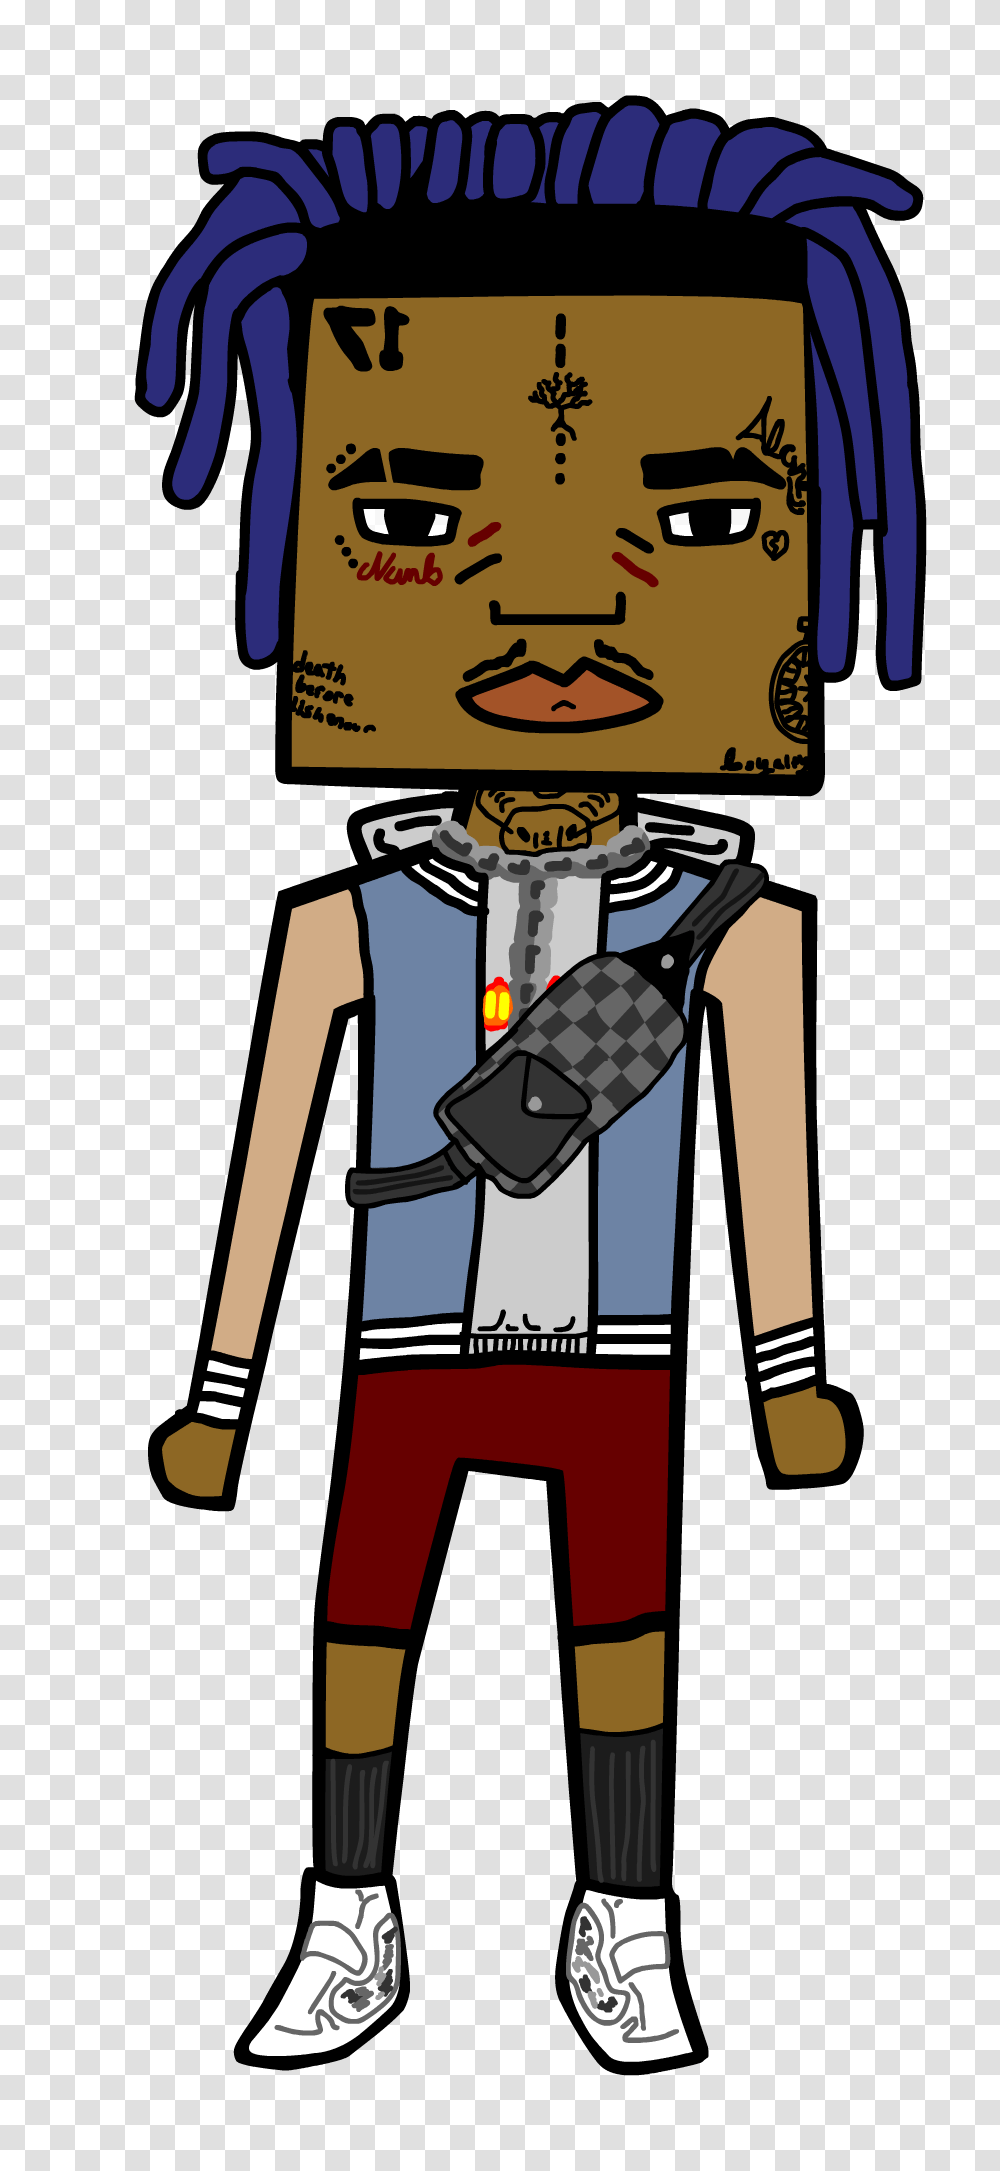 Just Made This Cartoon Drawing Of X My Time Using Adobe, Apparel, Nutcracker, Pillar Transparent Png